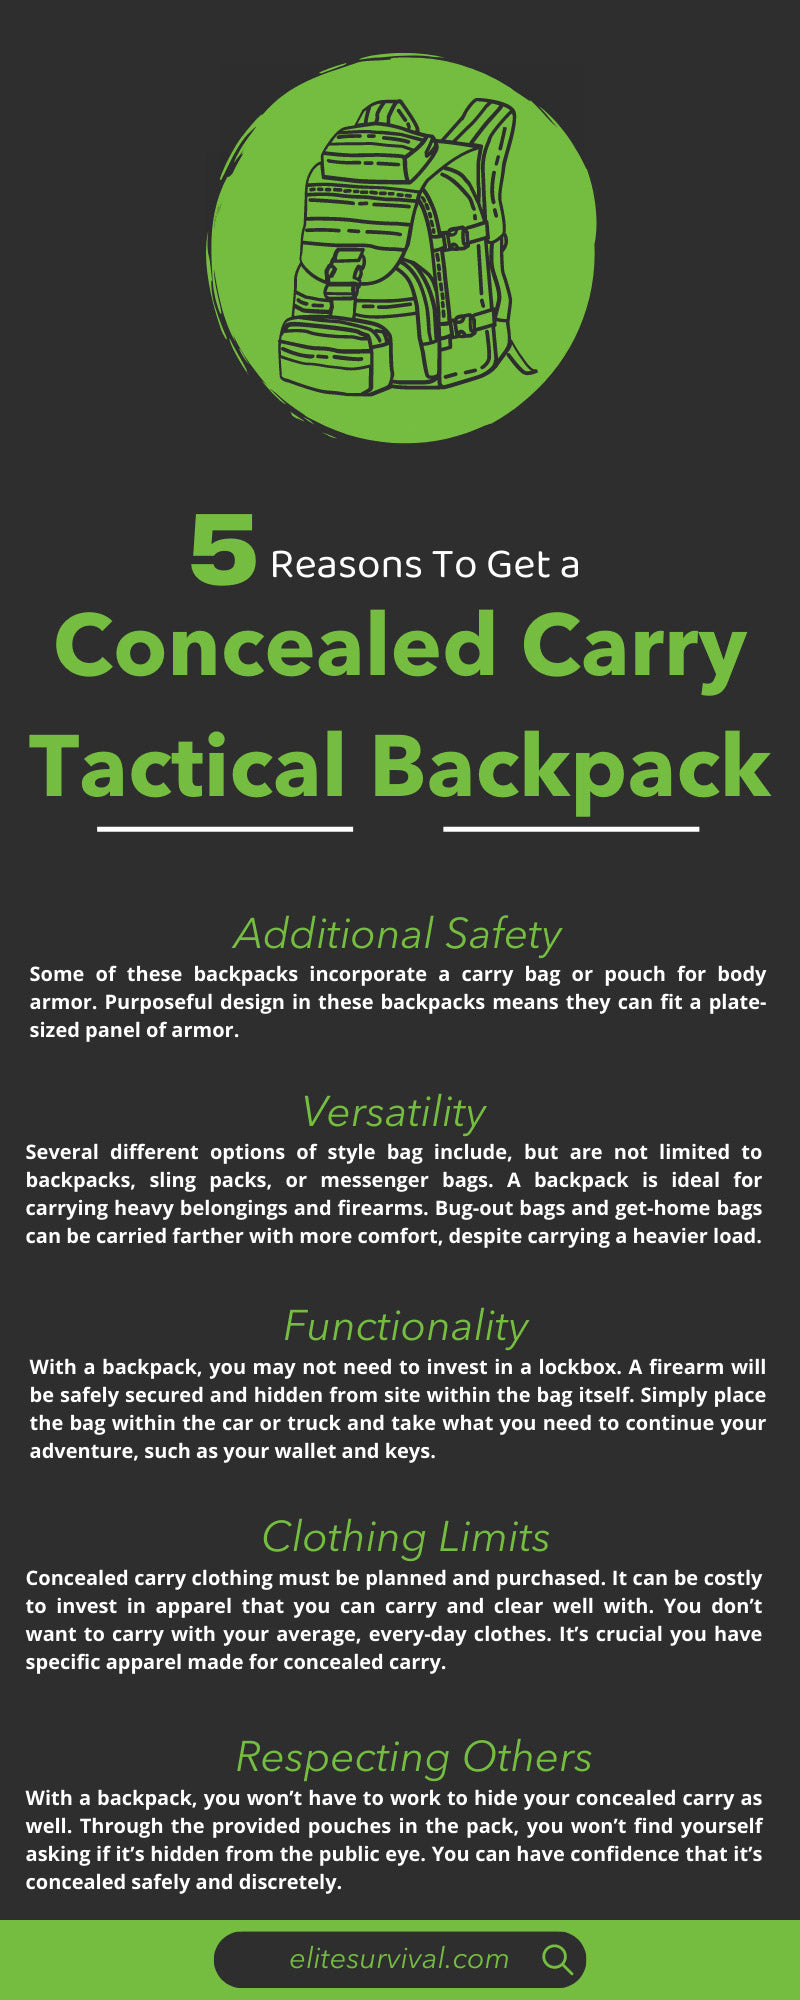 5 Reasons To Get a Concealed Carry Tactical Backpack